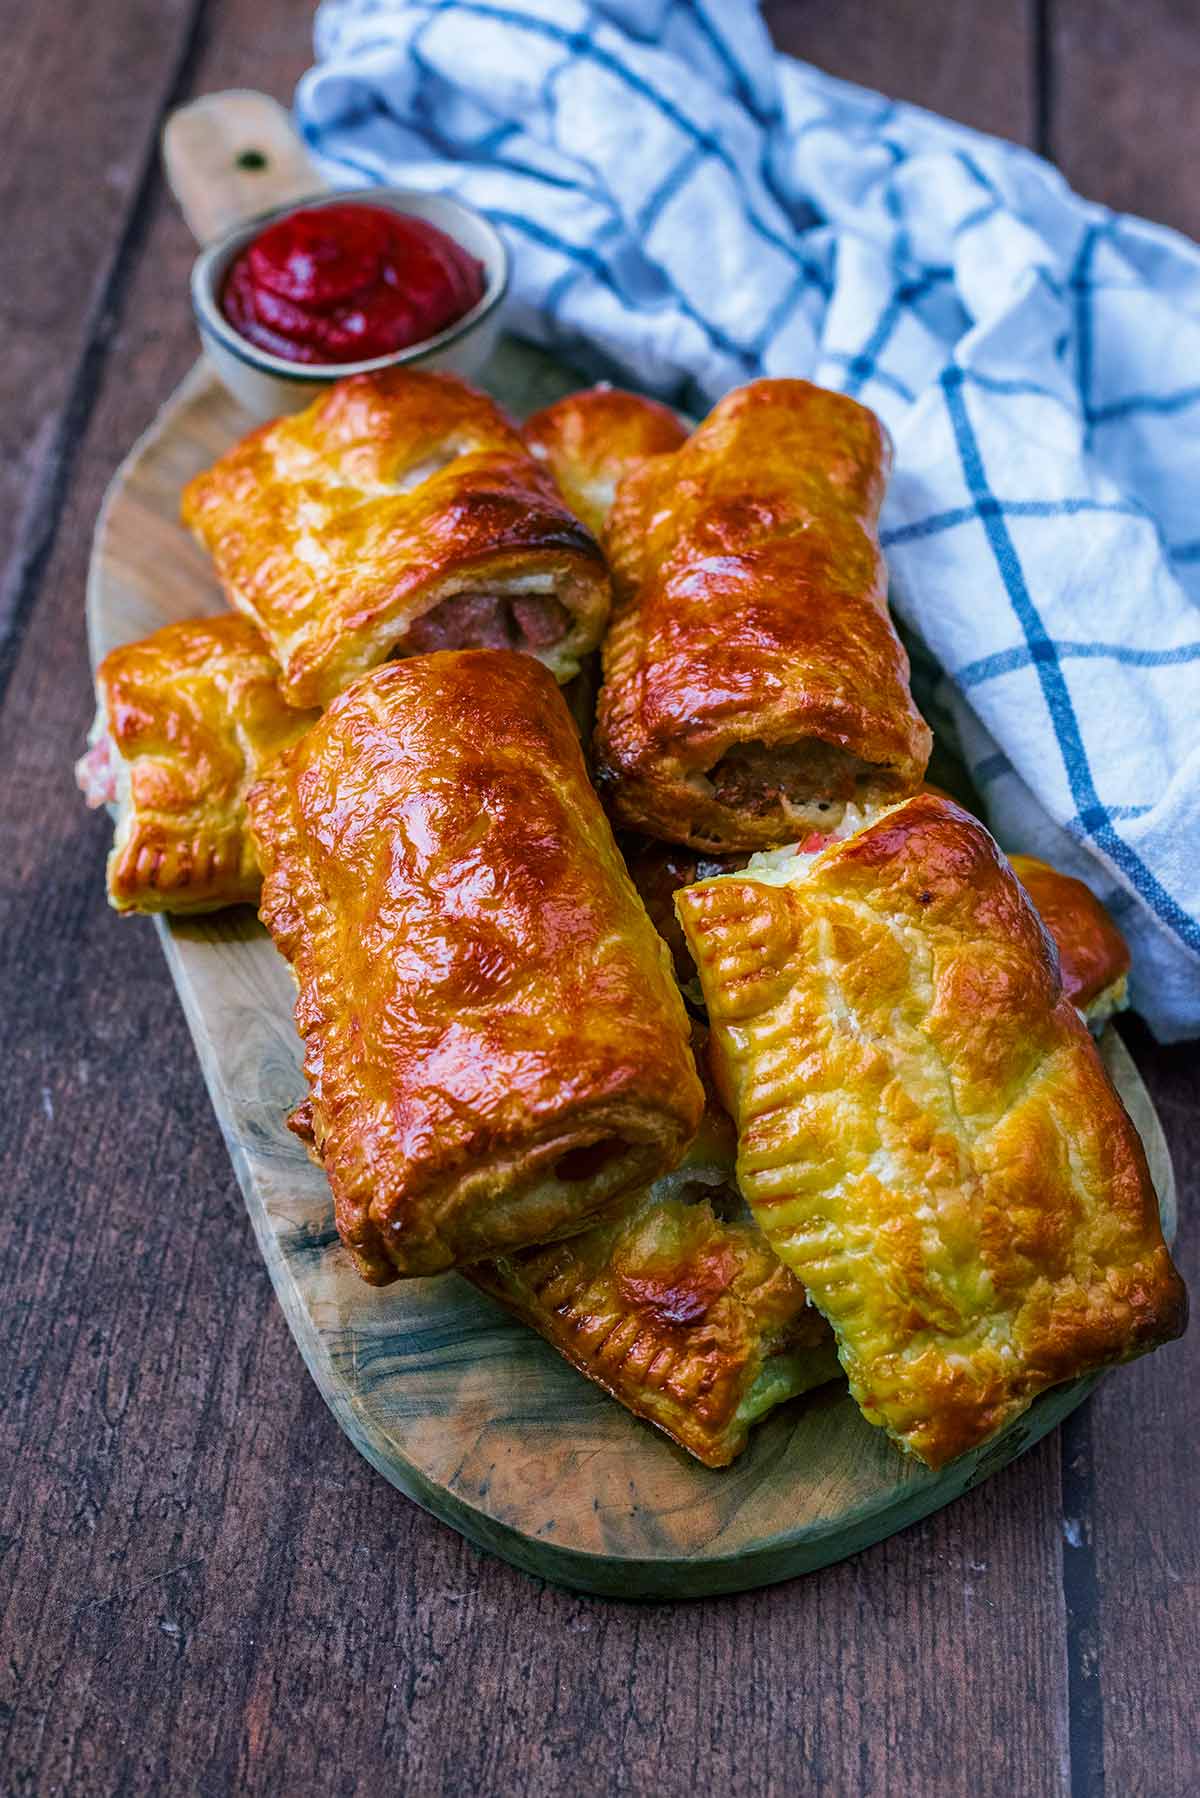 Sausage rolls on a wooden board in front of a checked towel.